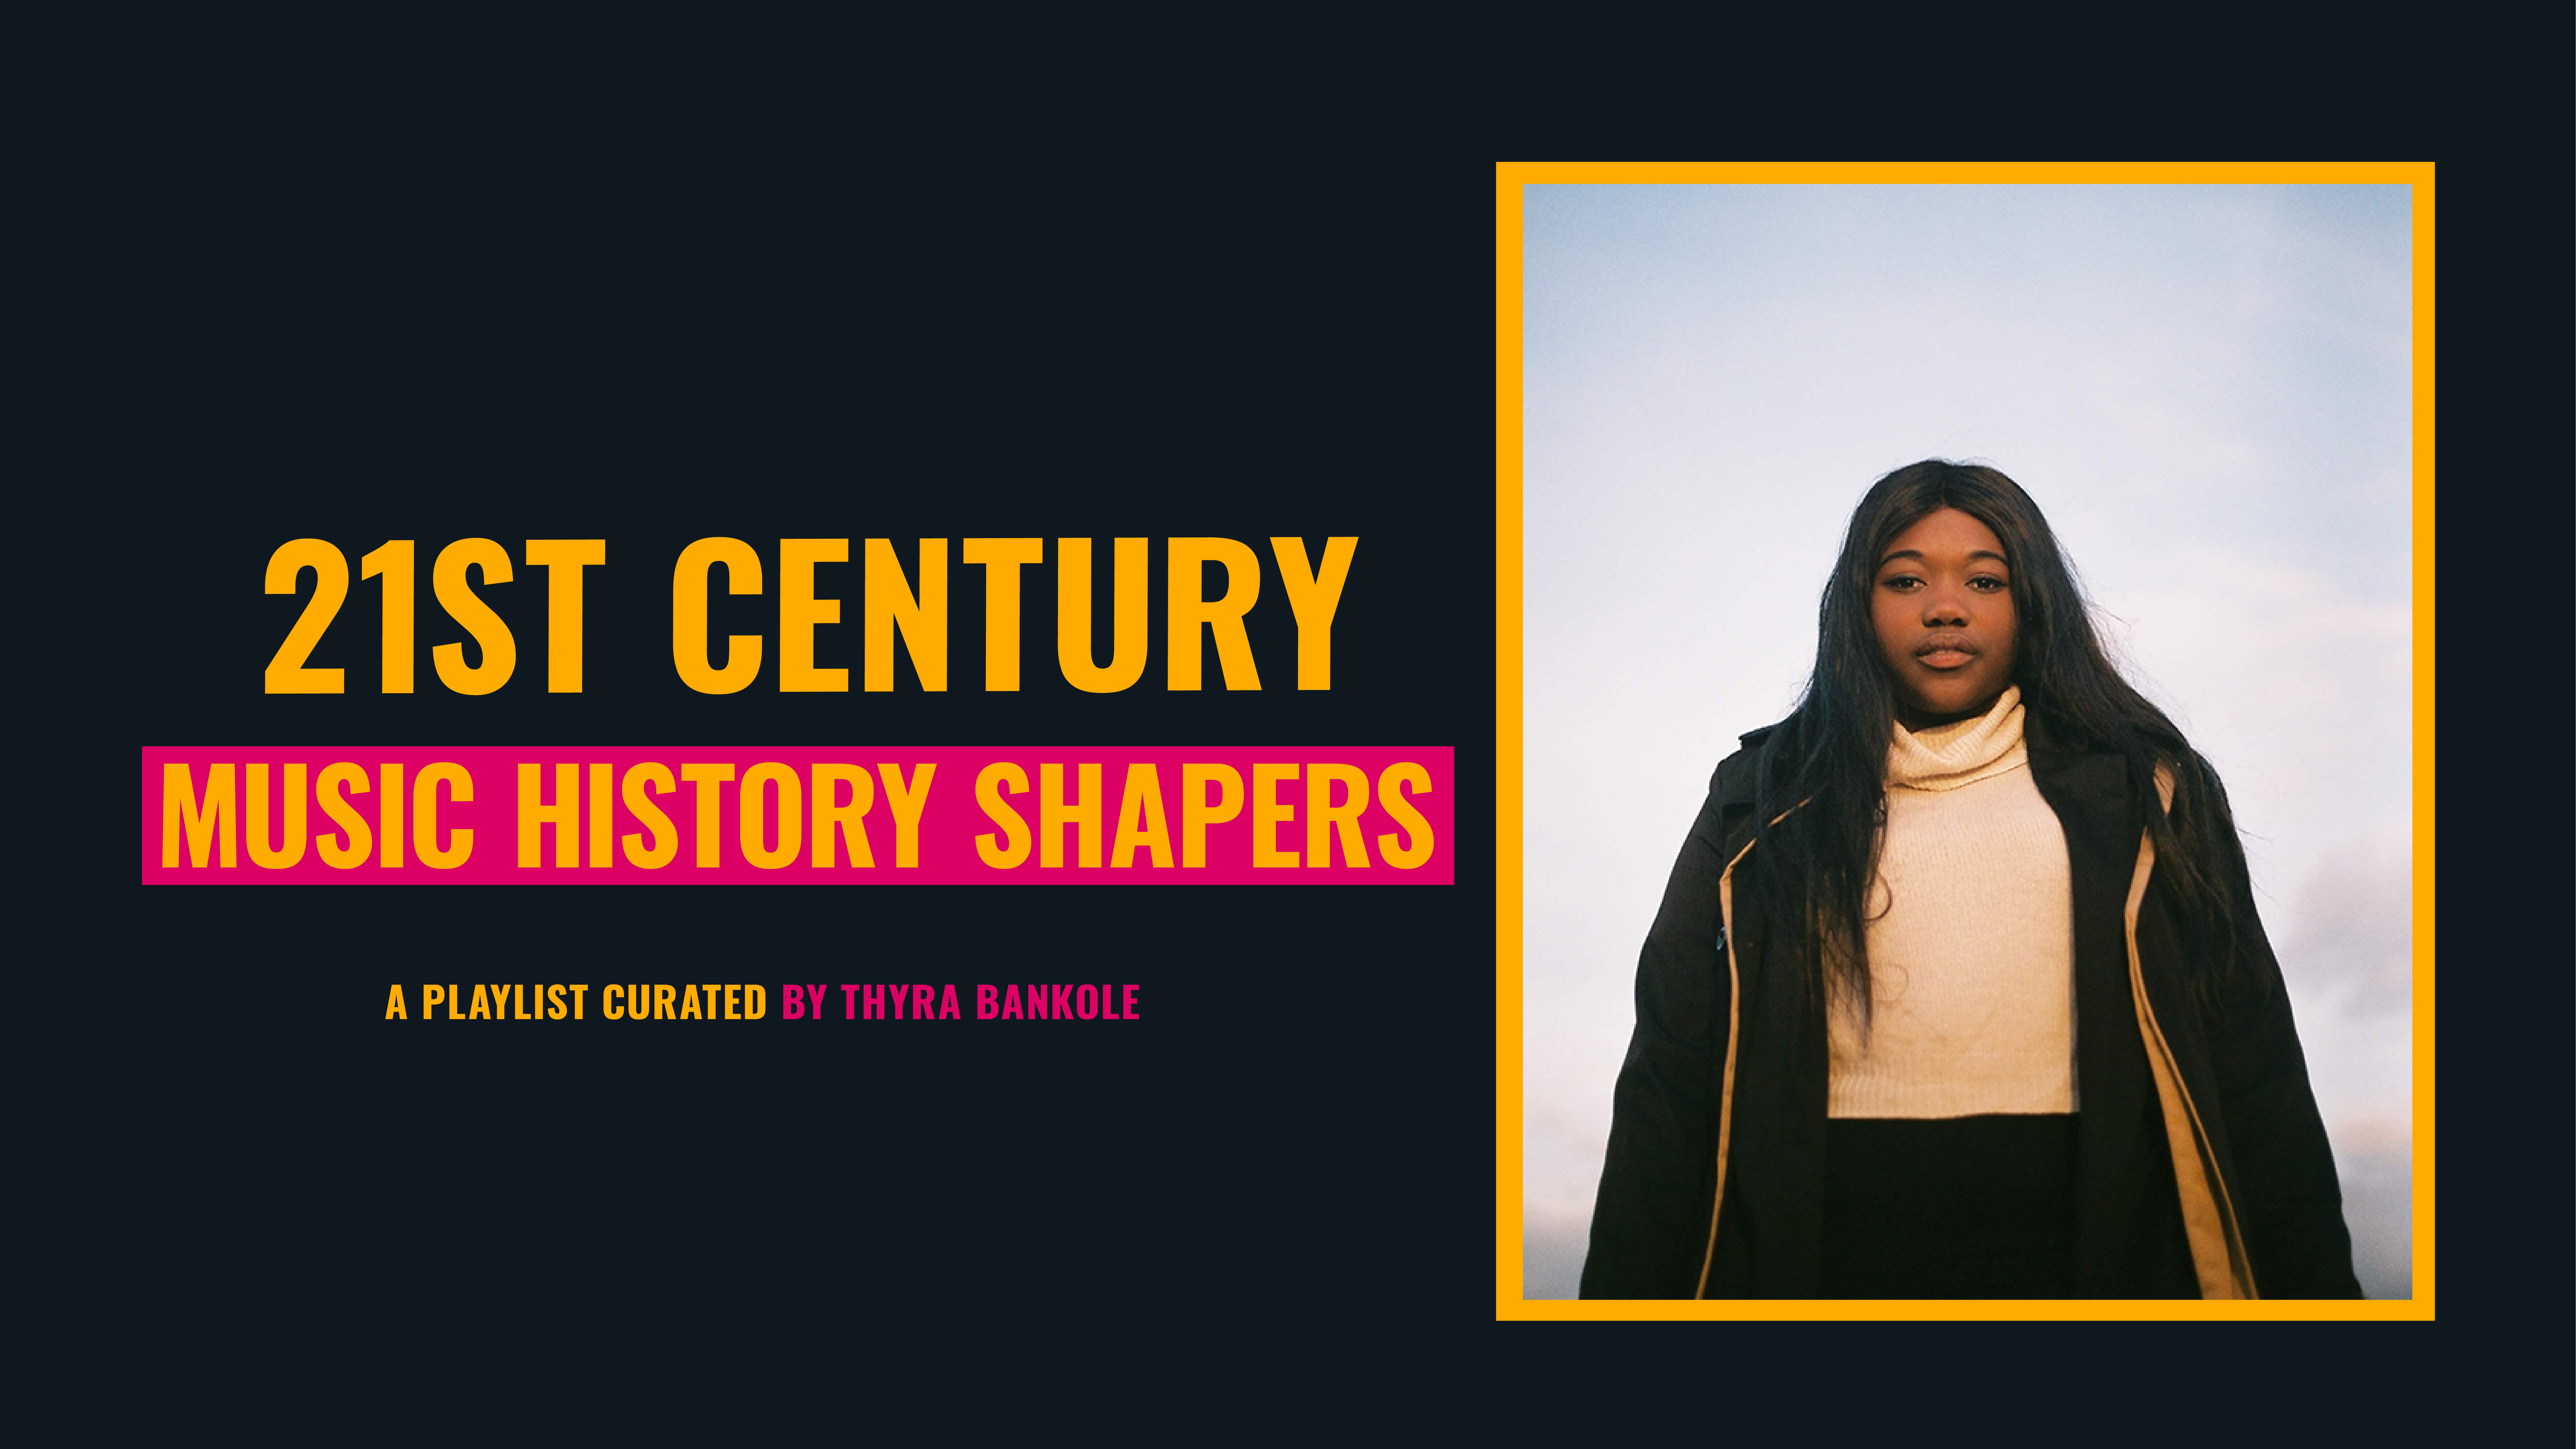 Listen in: 21st Century Music History Shapers